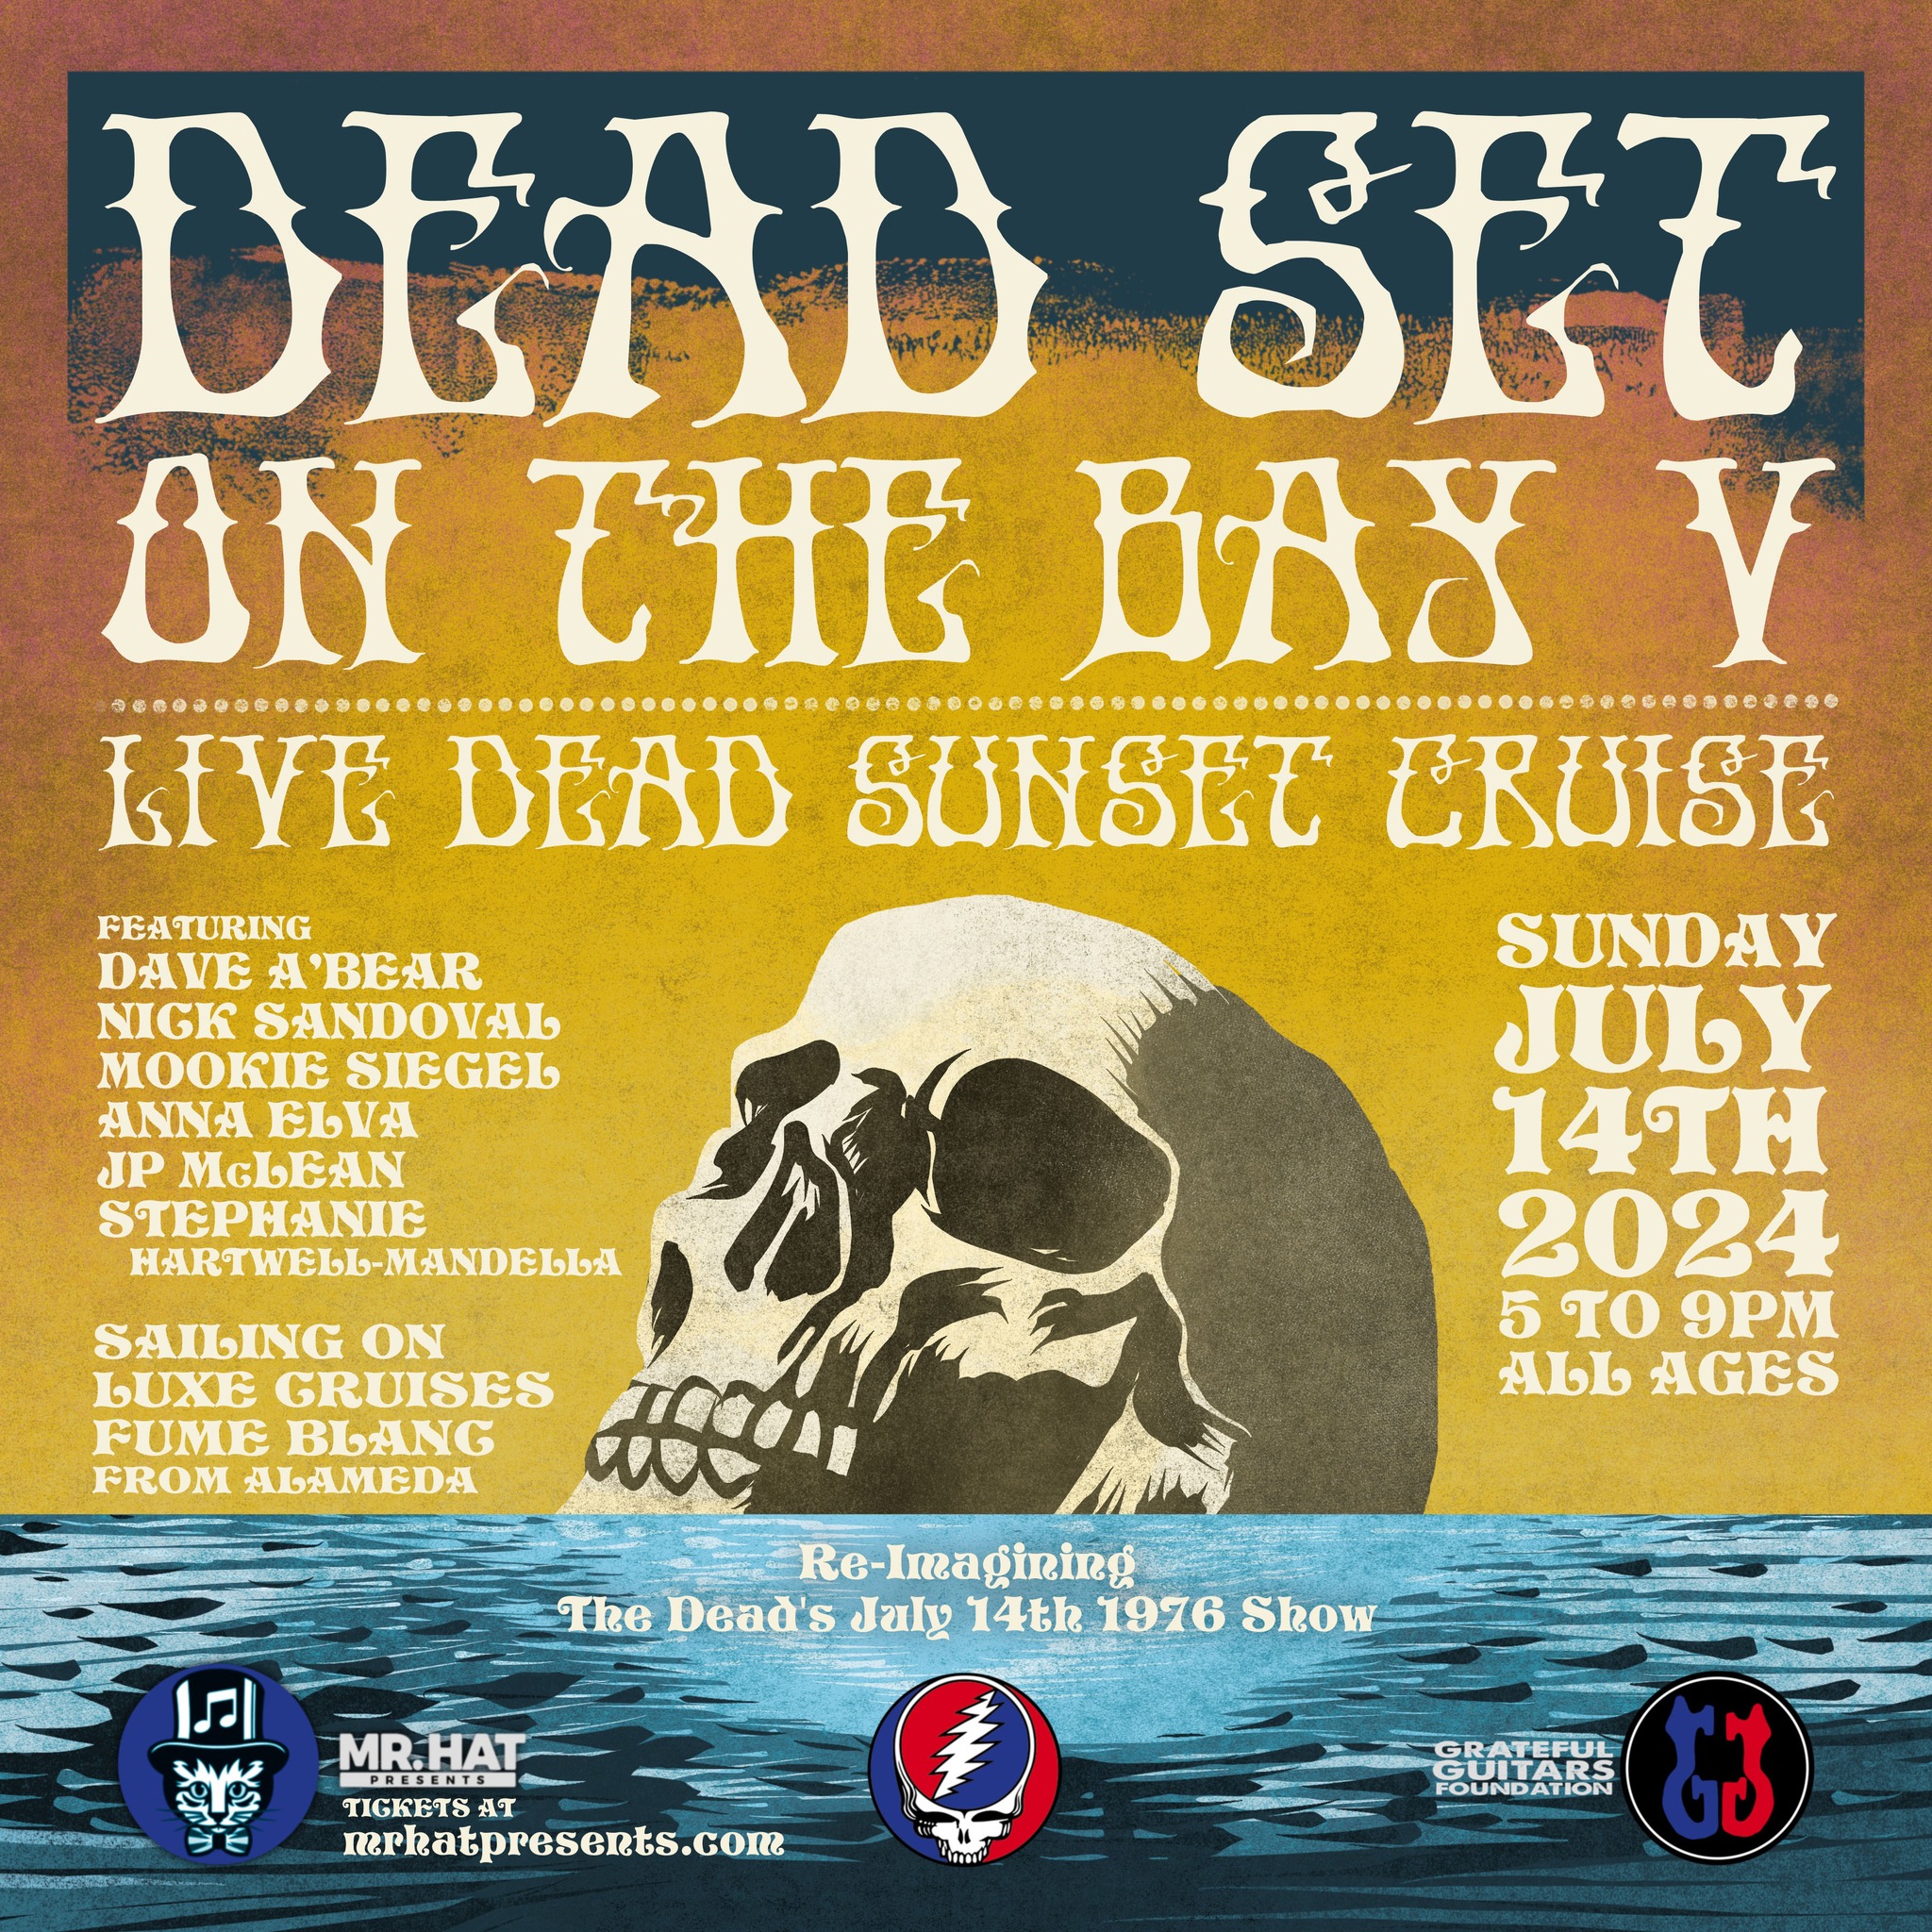 DEAD SET ON THE BAY V – THE LIVE DEAD SUNSET CRUISE!